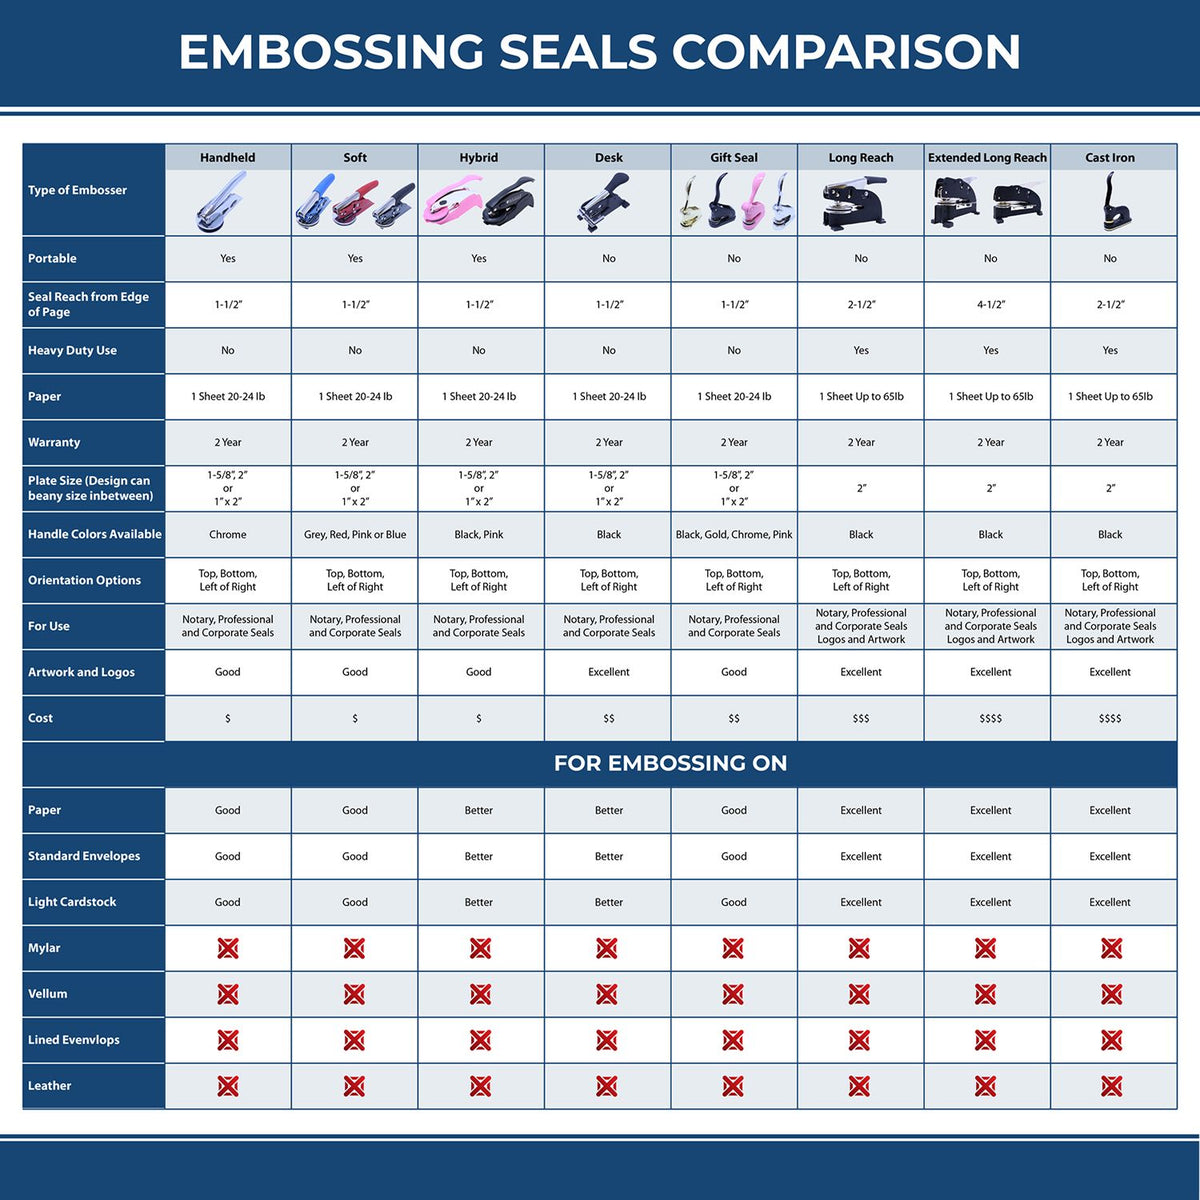 A comparison chart for the different types of mount models available for the Extended Long Reach Colorado Surveyor Embosser.